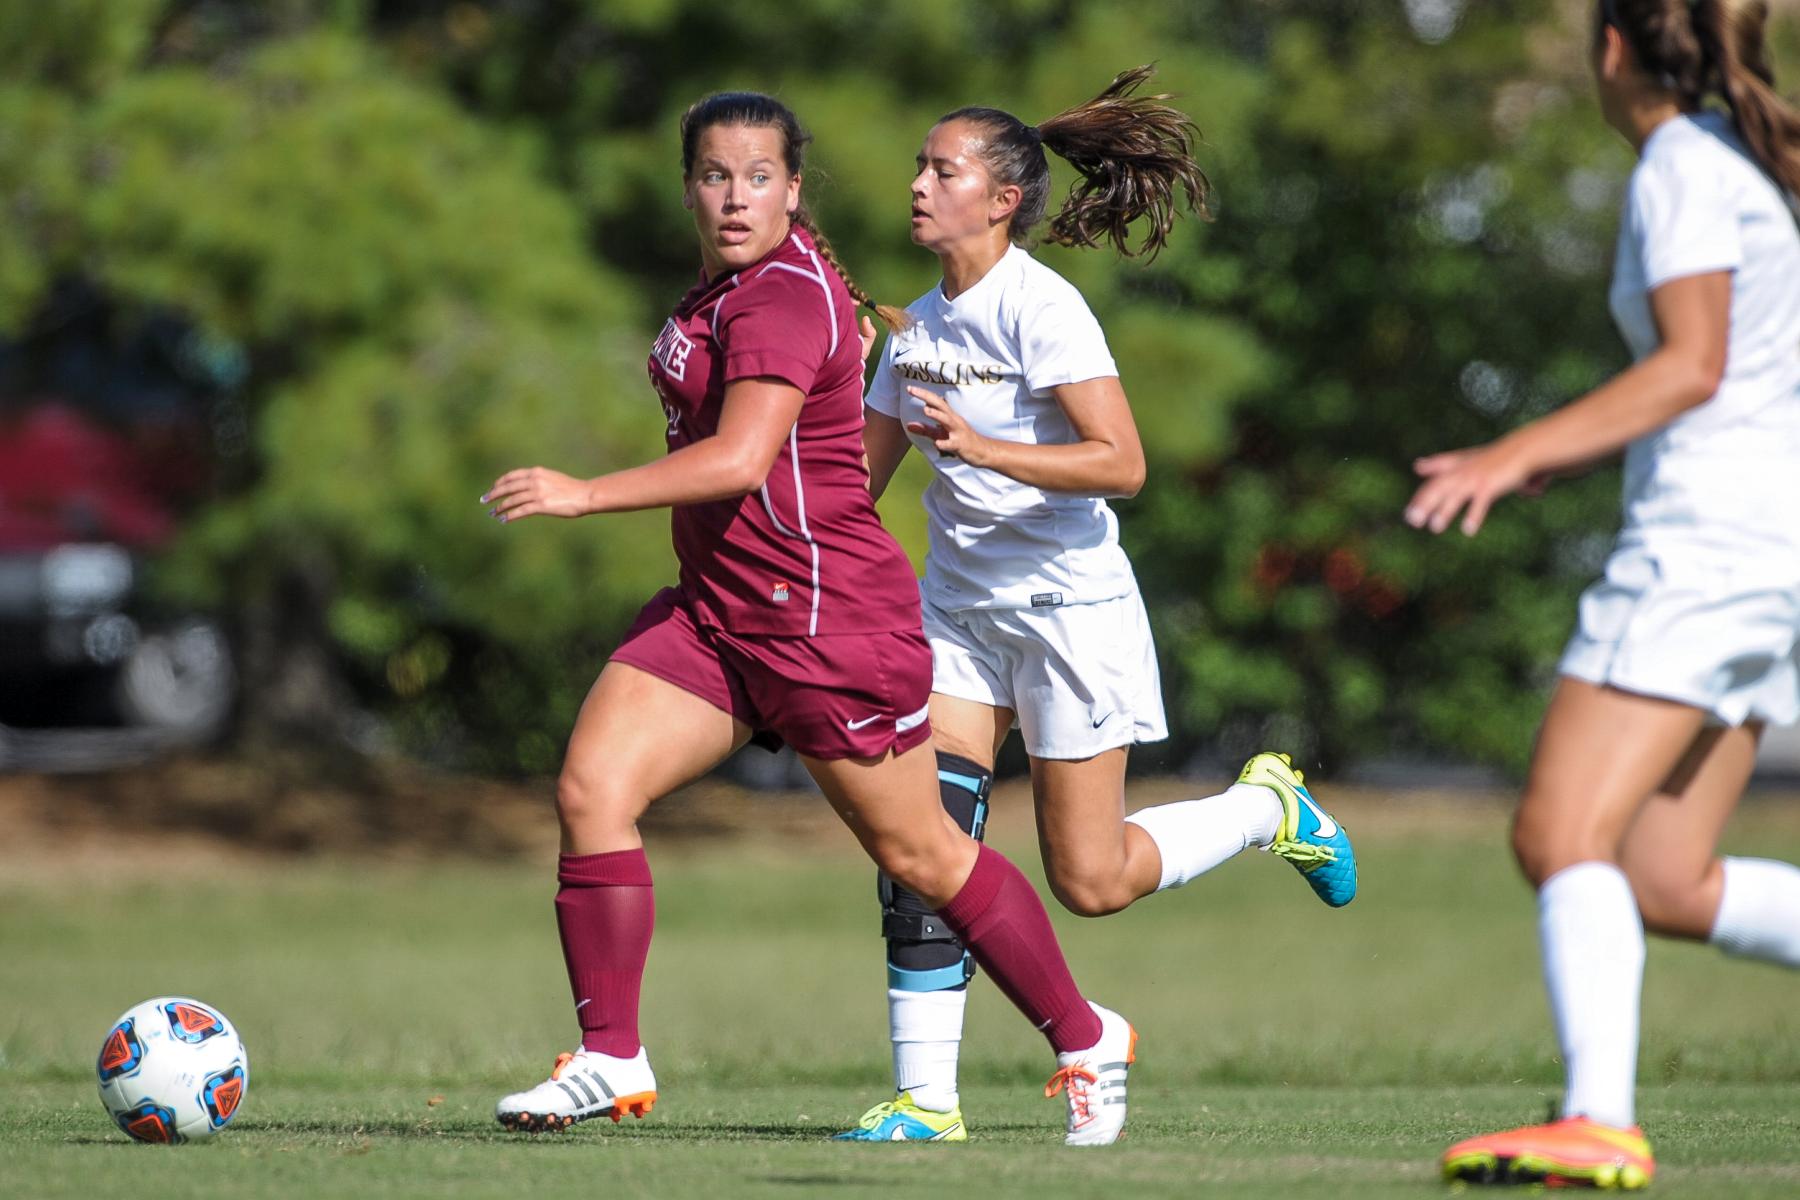 Maroons Fall 1-0 to Marlins in ODAC Action